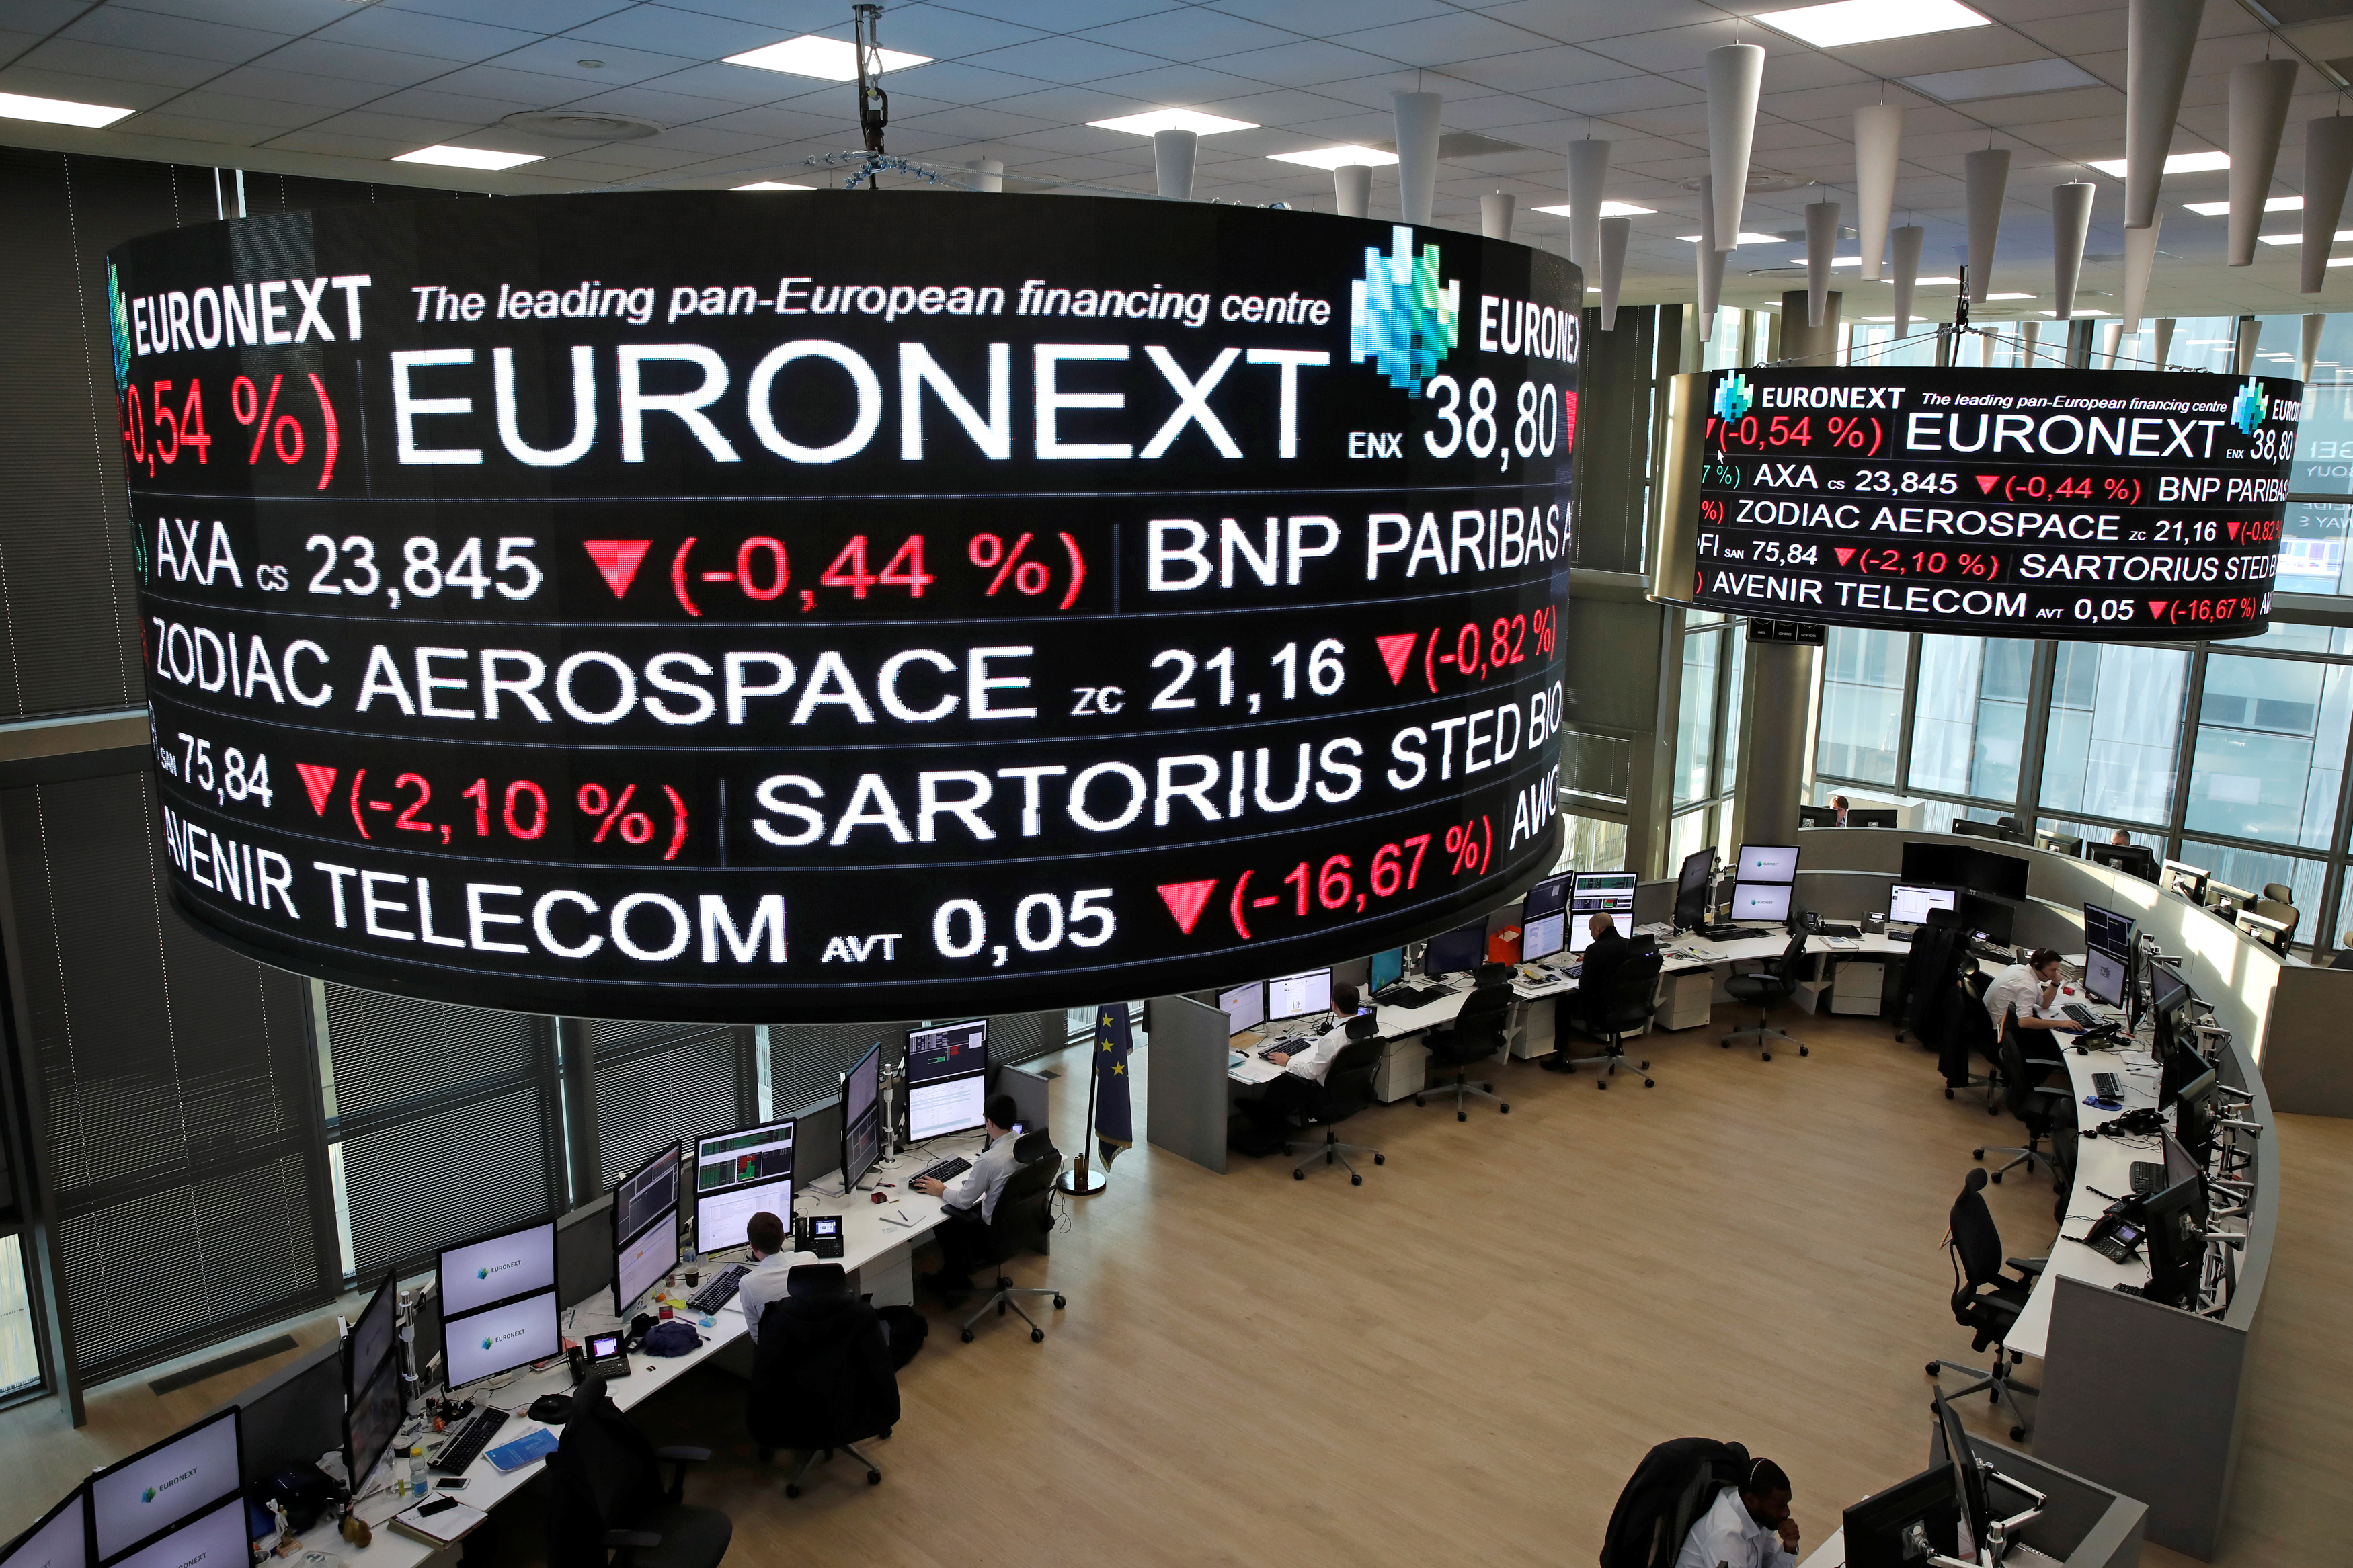 Company stock price information is displayed on screens as they hang above the Paris stock exchange, operated by Euronext NV, in La Defense business district in Paris